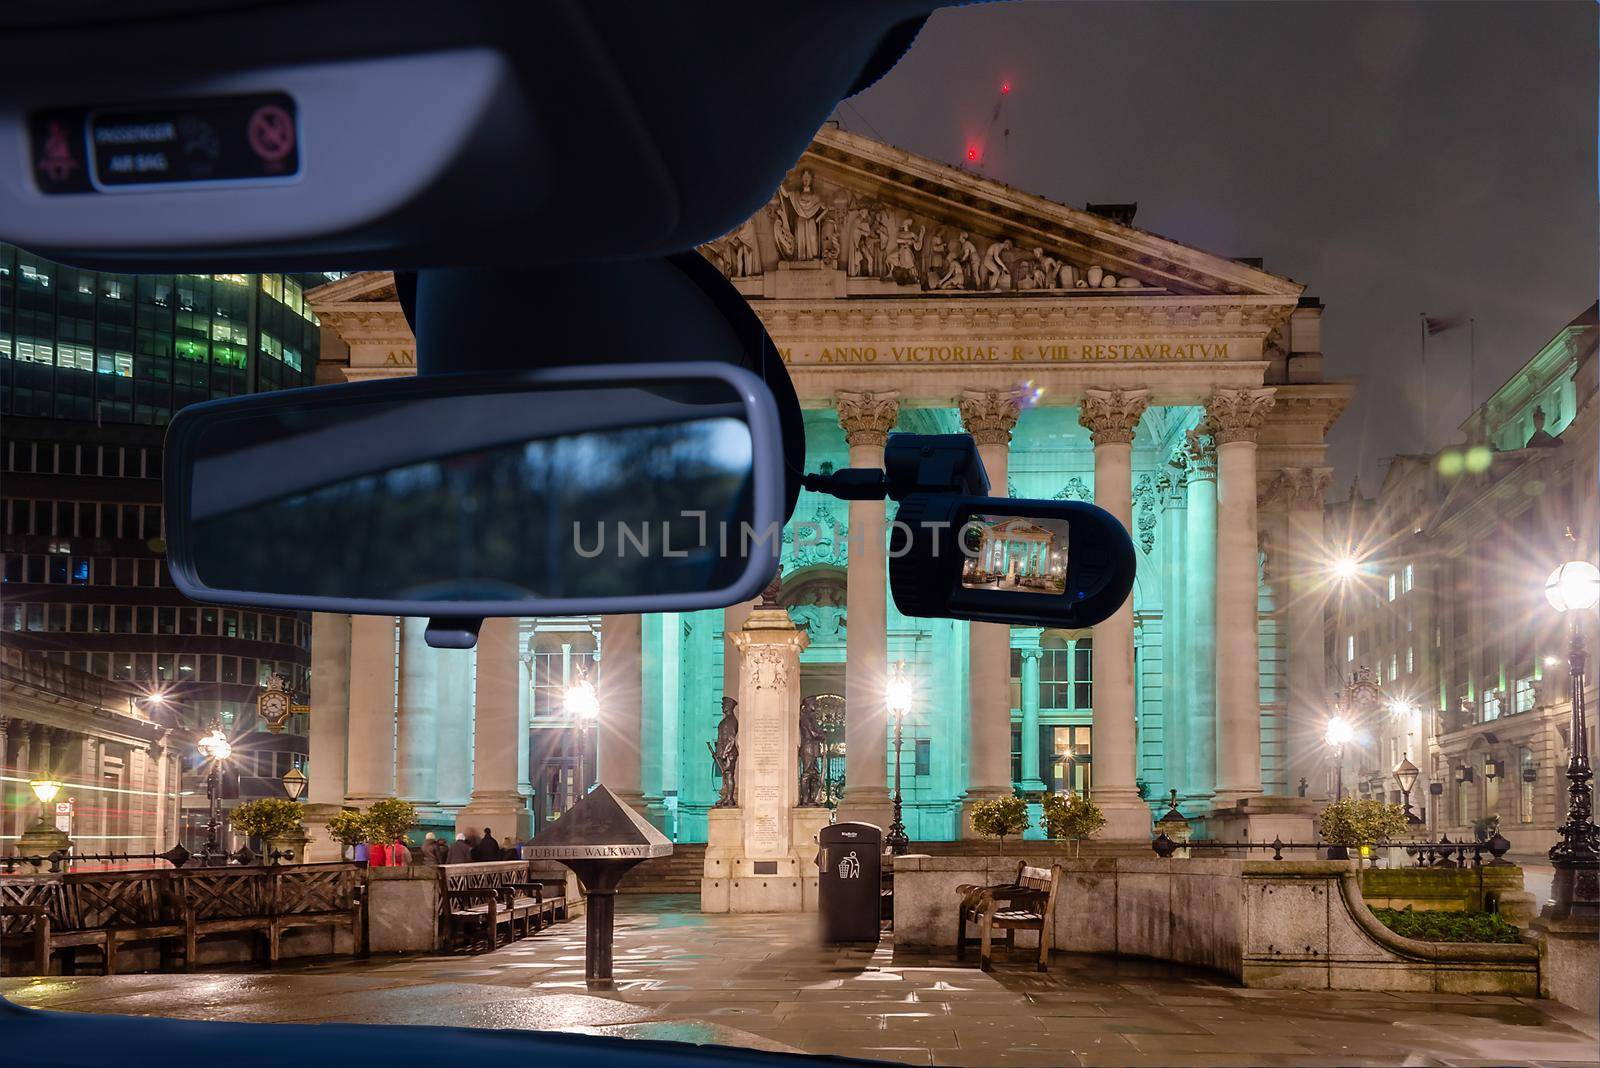 Looking through a dashcam car camera installed on a windshield with view of the Royal Exchange Building in the financial district of London, UK